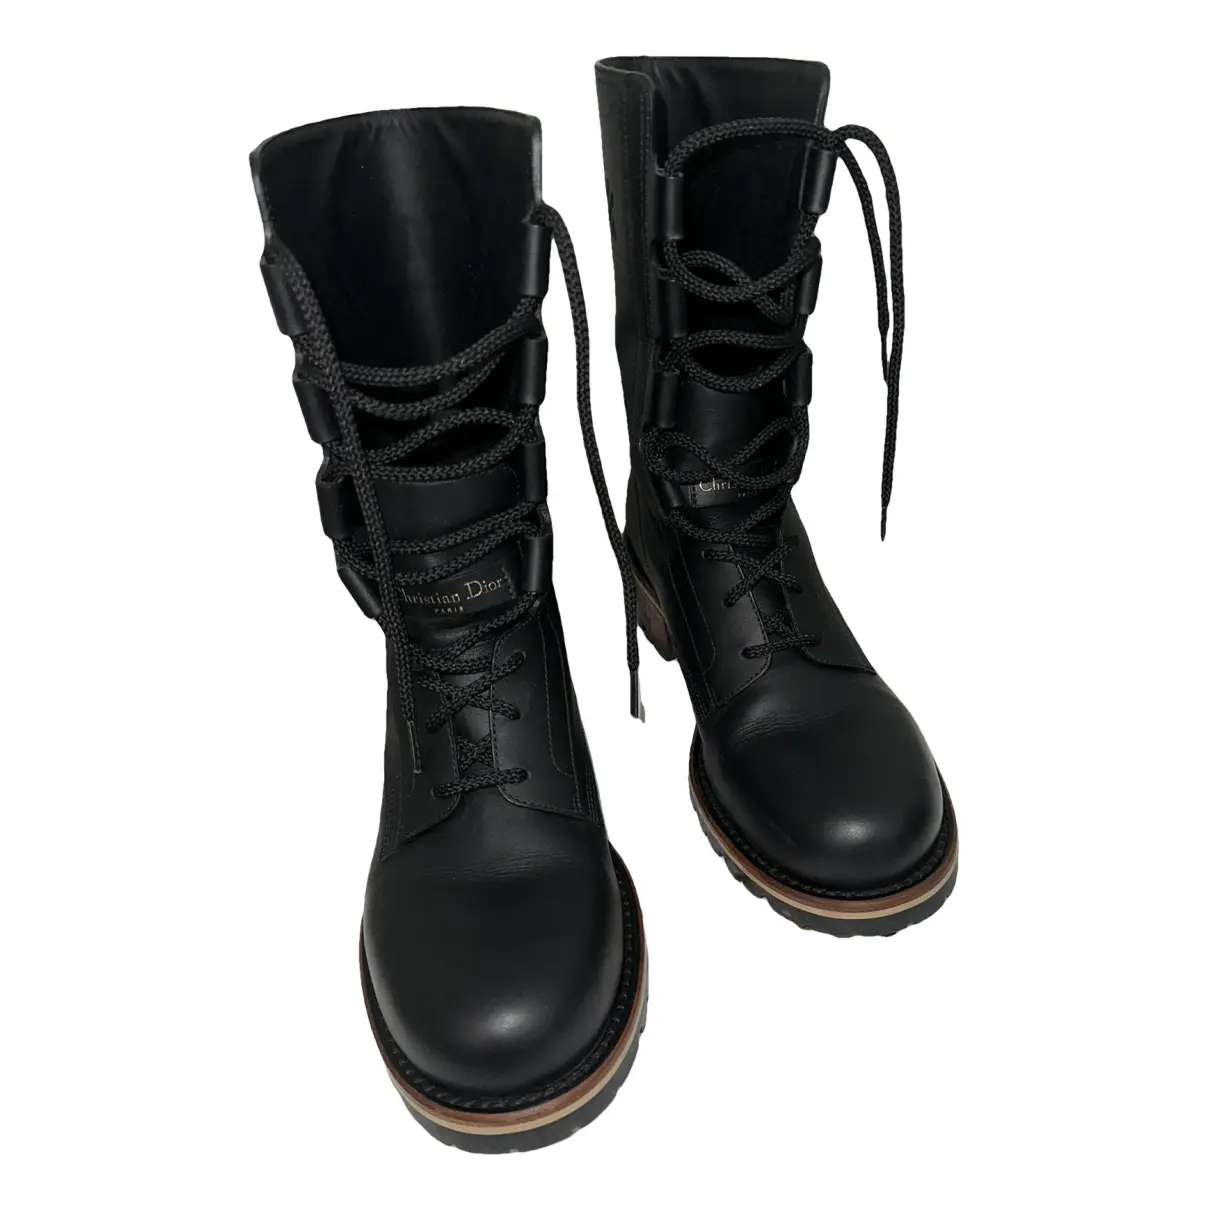 D-Trap leather boots